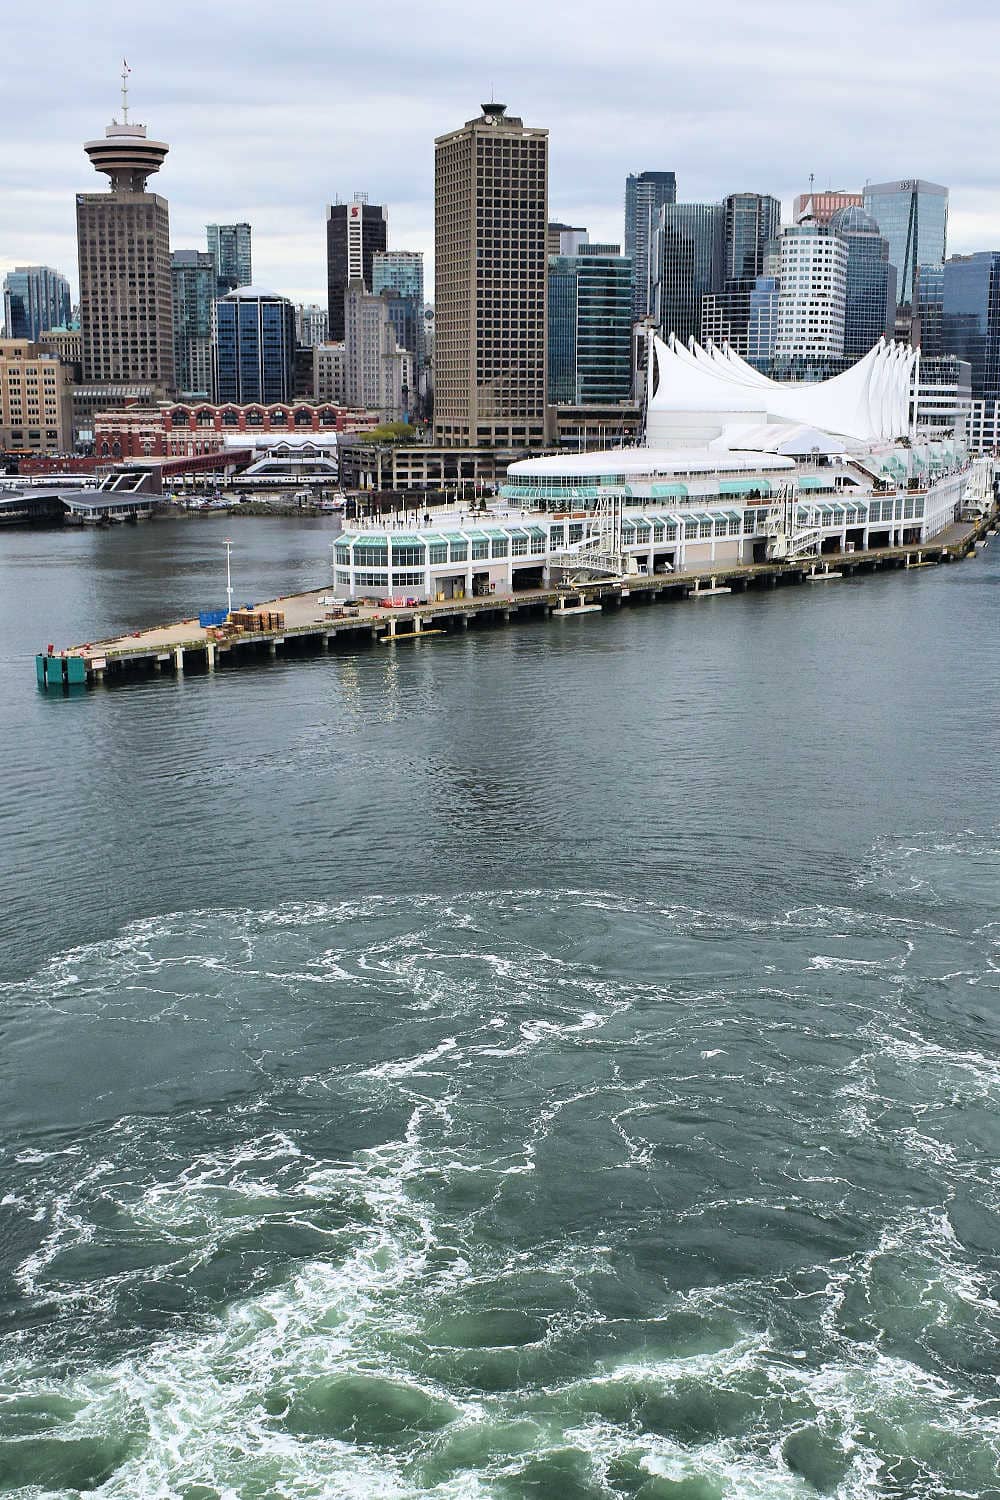 Cruising to Alaska from Canada Place, Vancouver's cruise terminal